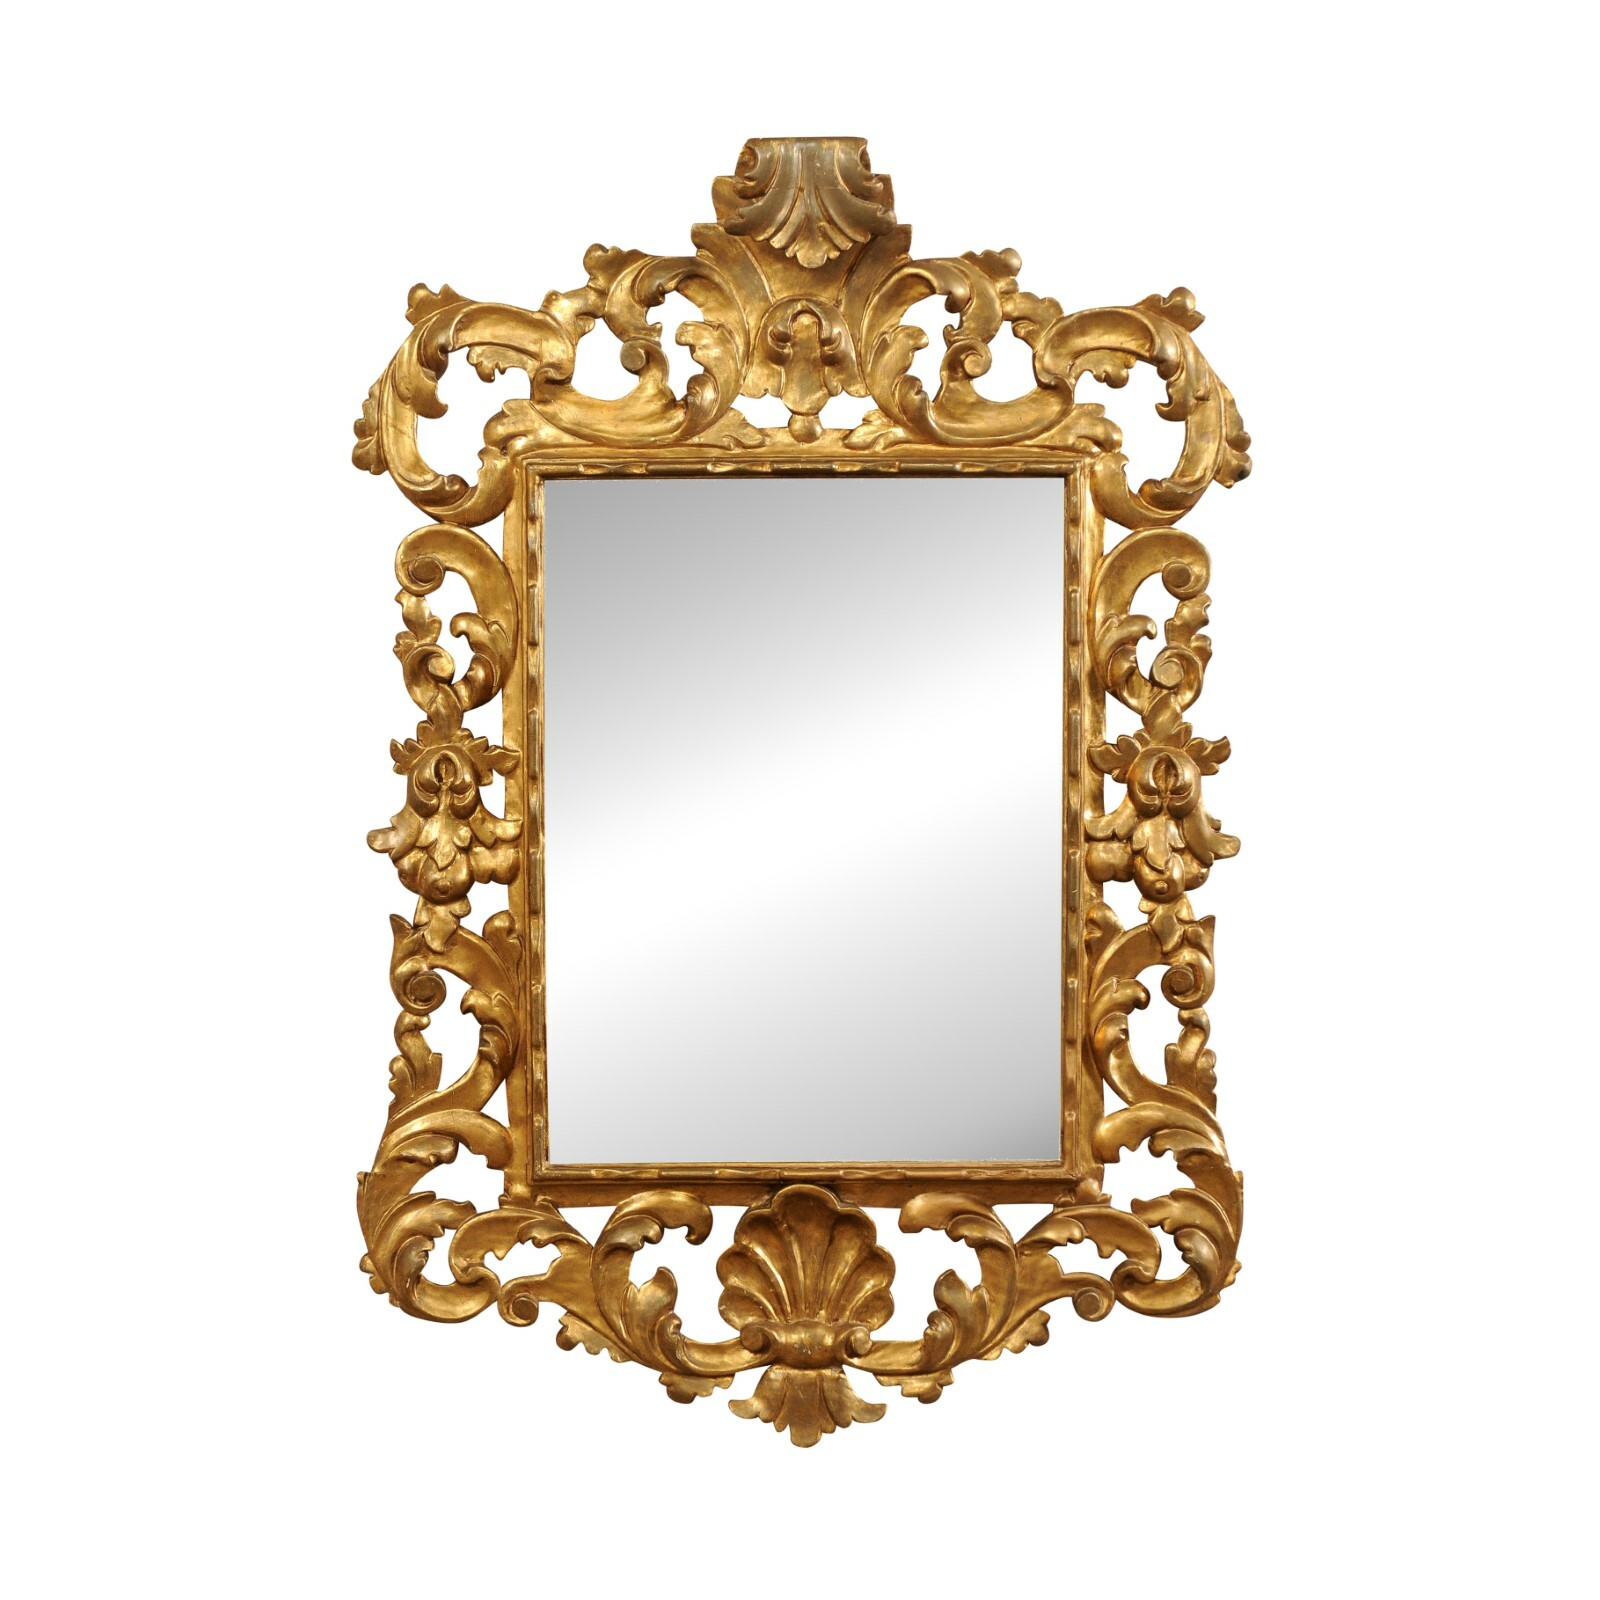 French Rococo Style Good Mirror, 19th C.